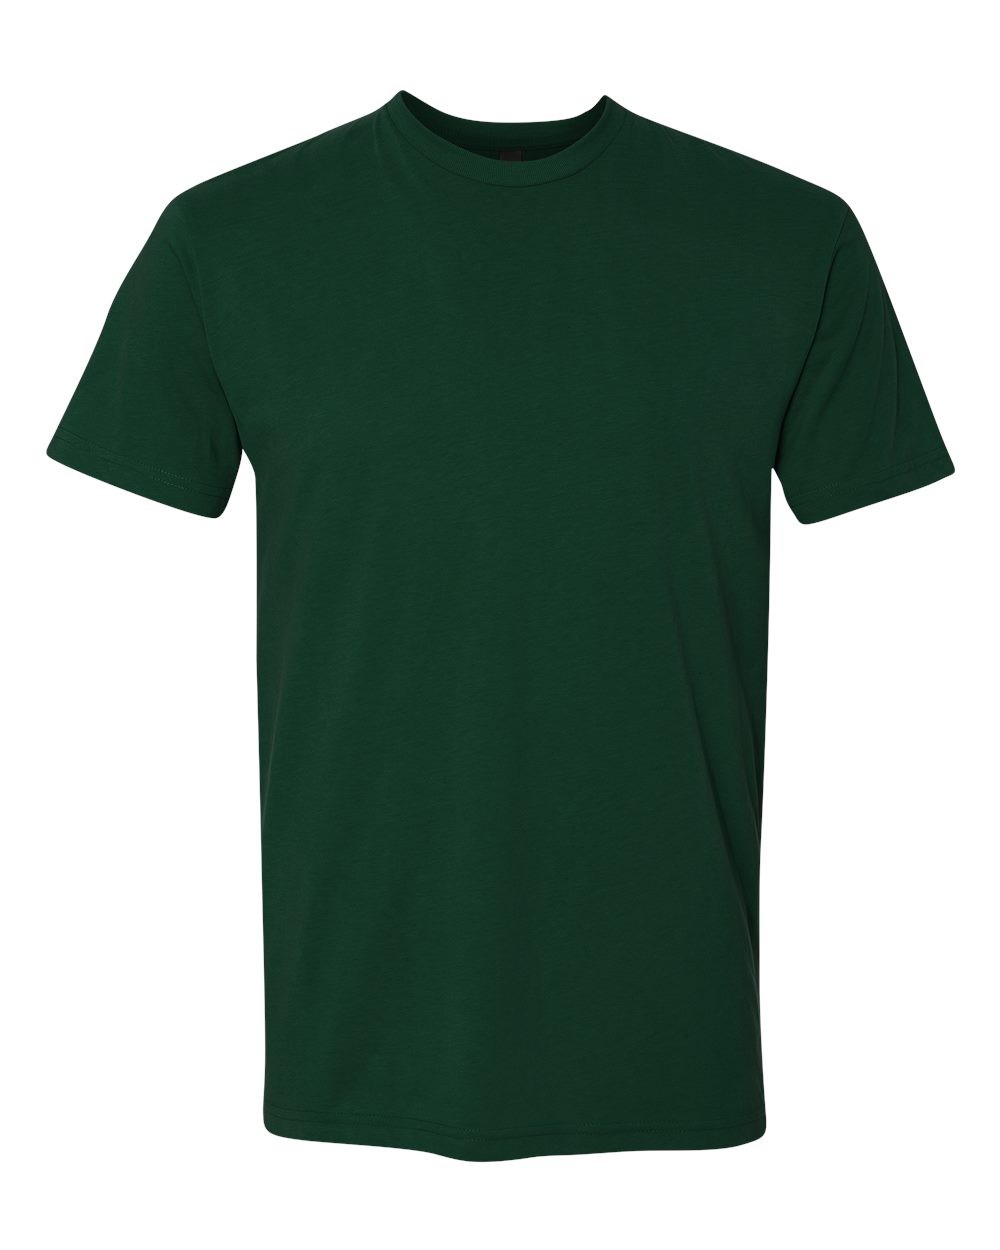 Next Level Tee 3600 - Forest Green